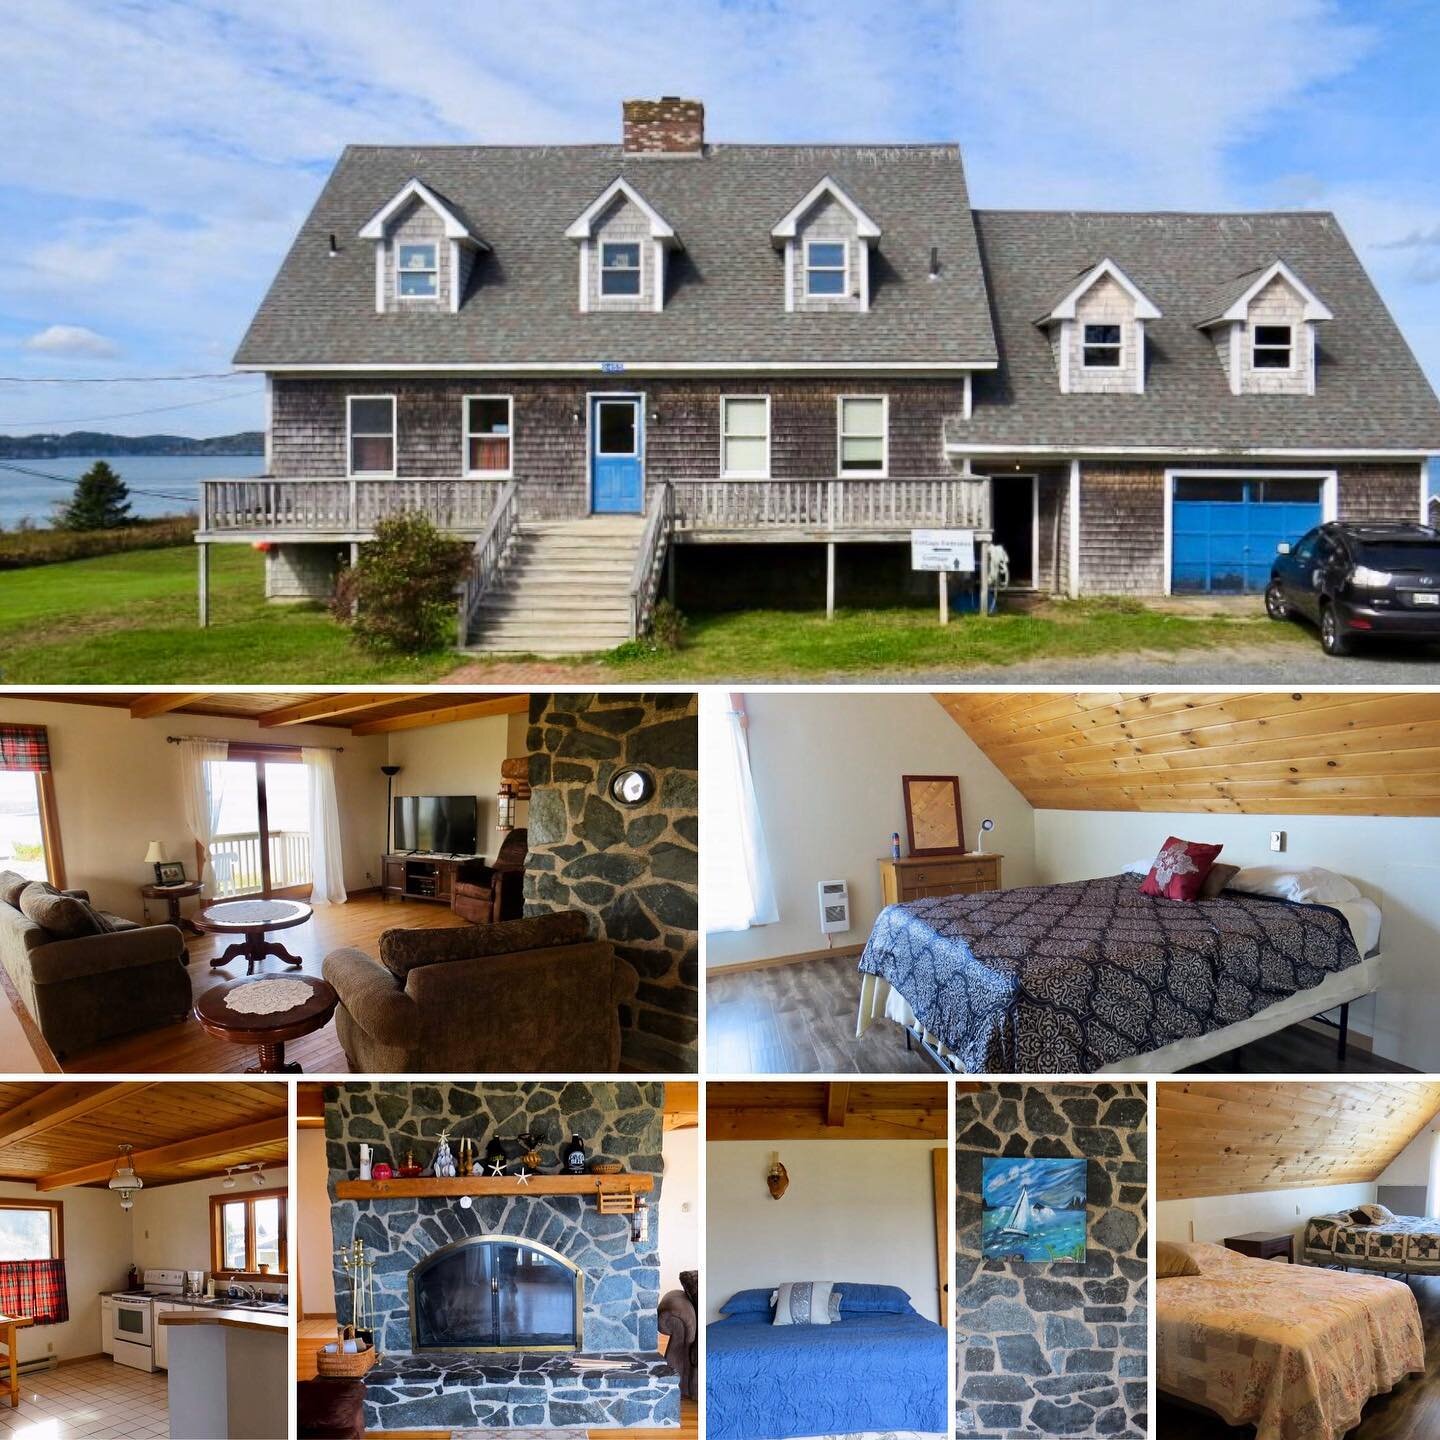 Sweeping ocean views, sleeps 9, space to relax, play games and cook with your family. Still some availability for August and fall visits. Book online or call us at 506-752-2300  #explorenb #explorecampobello #newbrunswick  #newbrunswickcanada #visitc